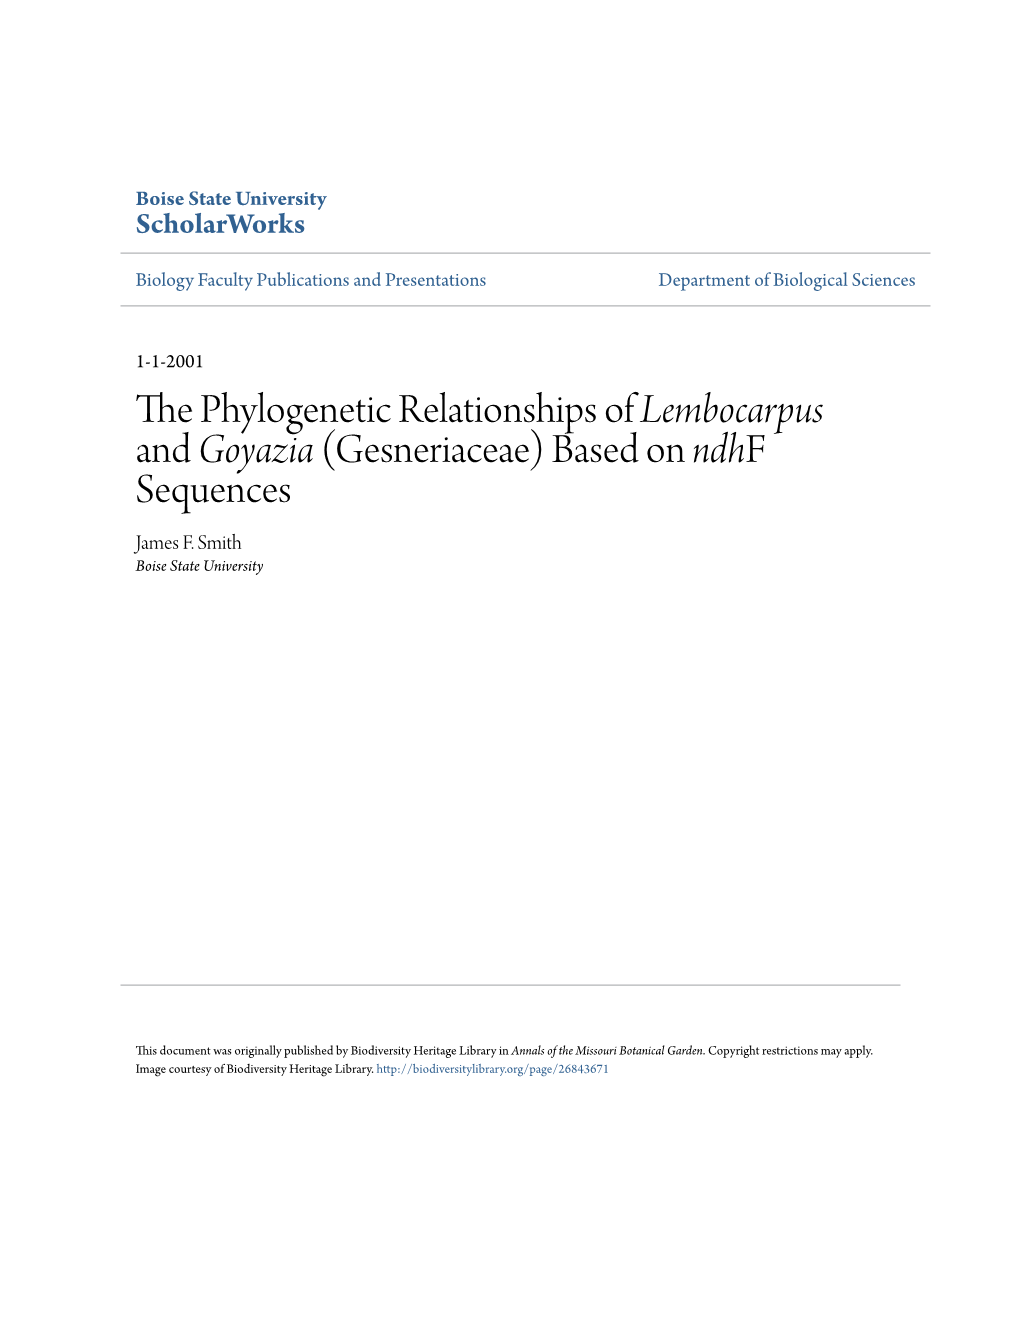 THE PHYLOGENETIC RELATIONSHIPS of LEMBOCARPUS and GOYAZIA (GESNERIACEAE) BASED on Ndhf SEQUENCES'